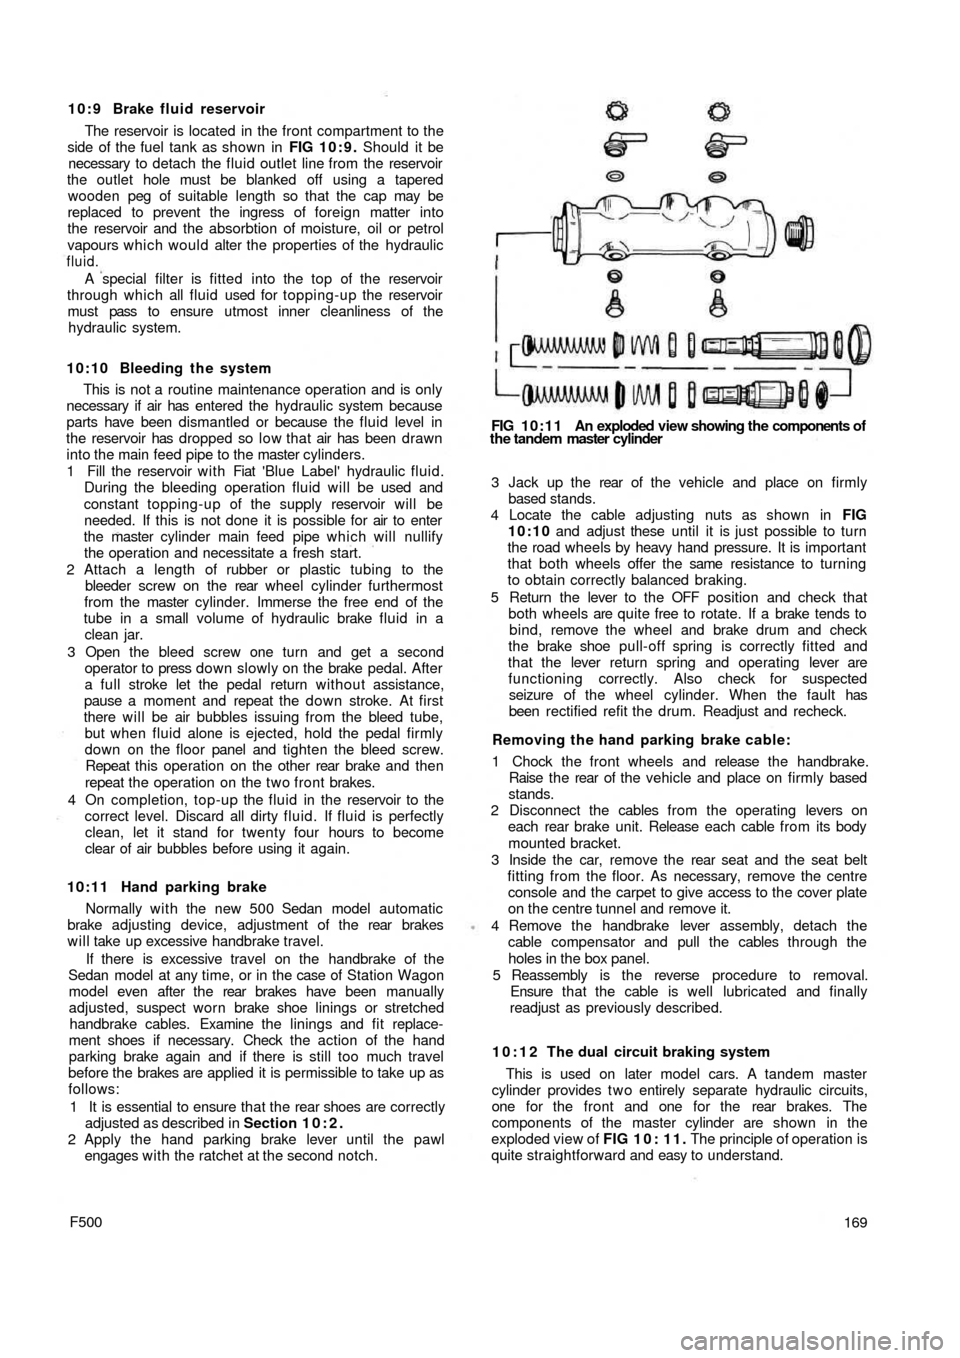 FIAT 500 1967 1.G Workshop Manual 10:9 Brake fluid reservoir
The reservoir is located in the front compartment to the
side of the fuel tank as shown  in FIG 10:9. Should it be
necessary to detach the fluid outlet line from  the reserv